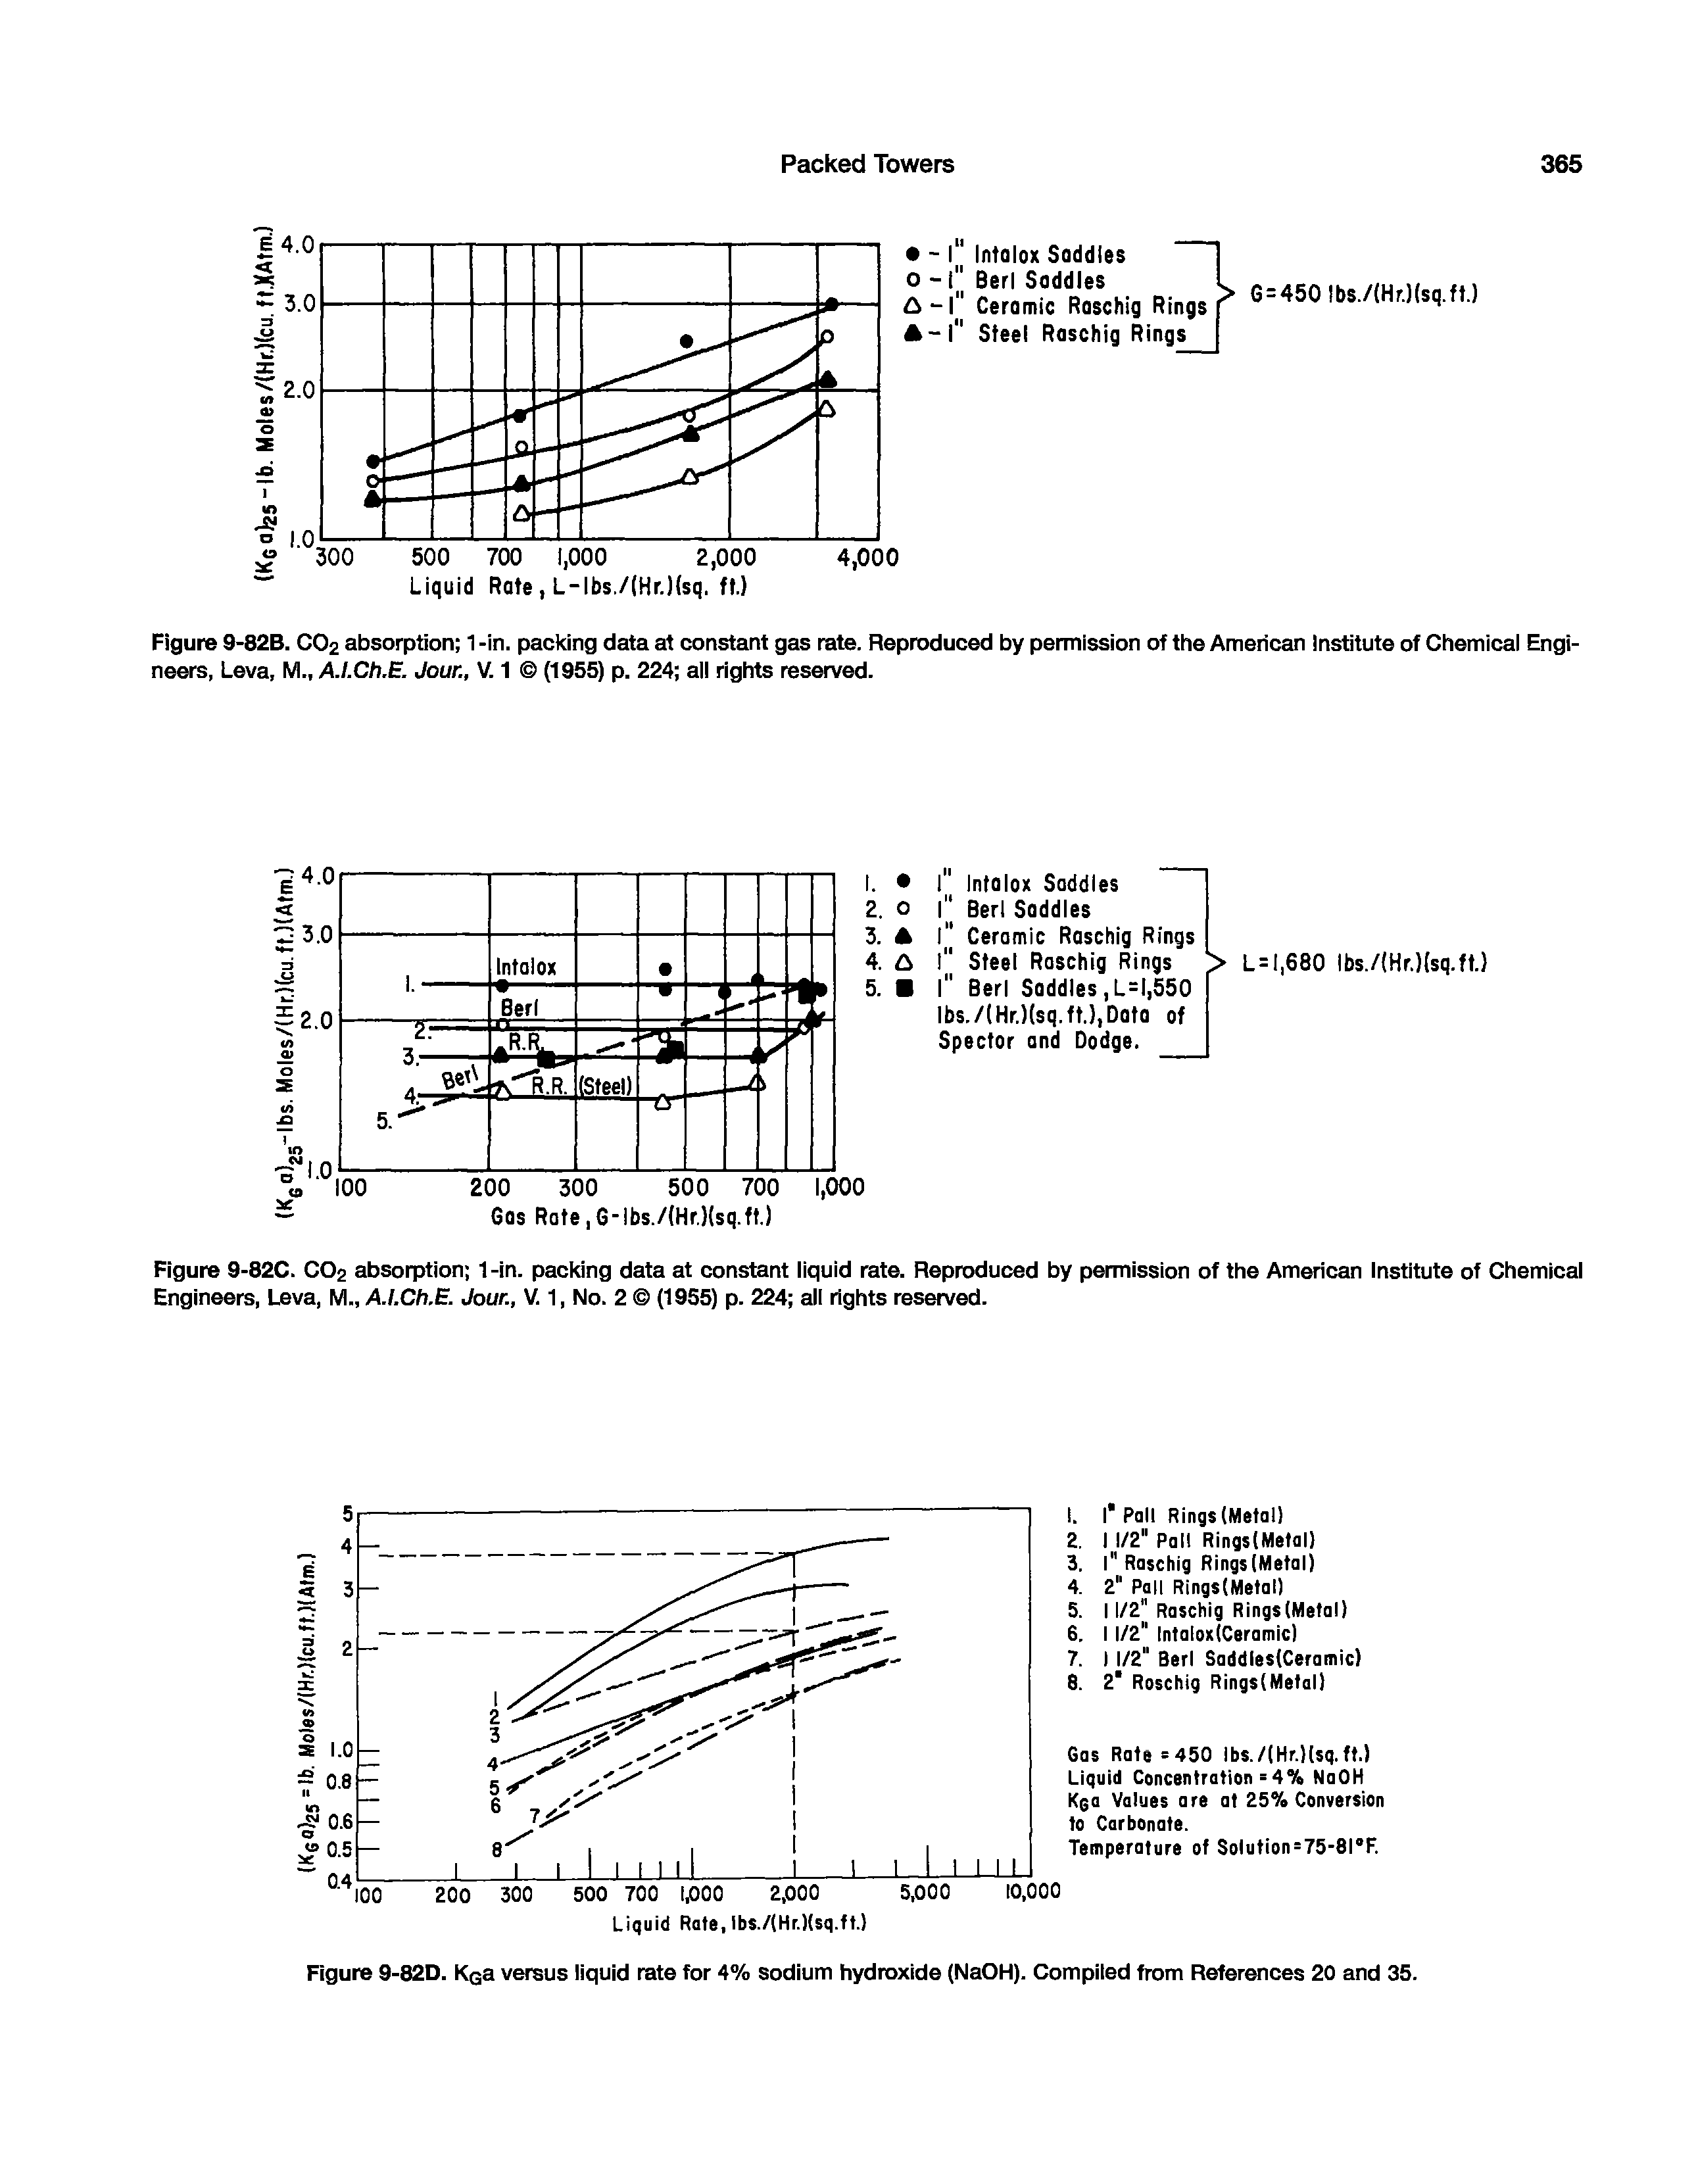 Figure 9-82B. CO2 absorption 1 -in. packing data at constant gas rate. Reproduced by permission of the American Institute of Chemical Engineers, Leva, M., AJ.Ch.E. Jour., V. 1 (1955) p. 224 all rights reserved.